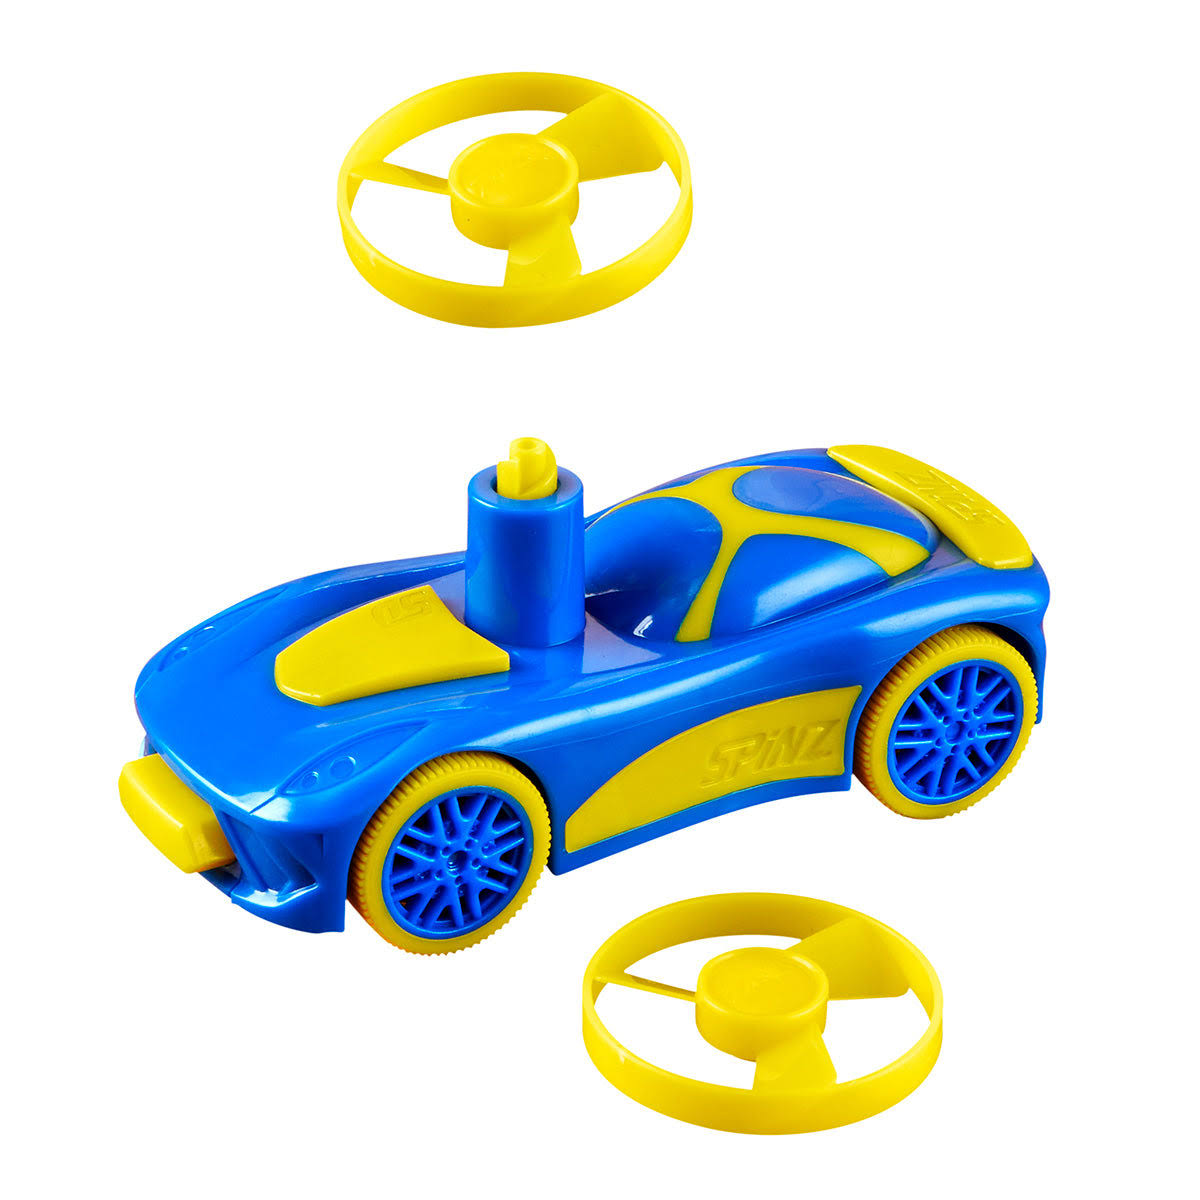 Skullduggery Spinz Pull-Back Race Car with Flying Disc - Blue / Yellow , 2.25 x 4.75 x 3"